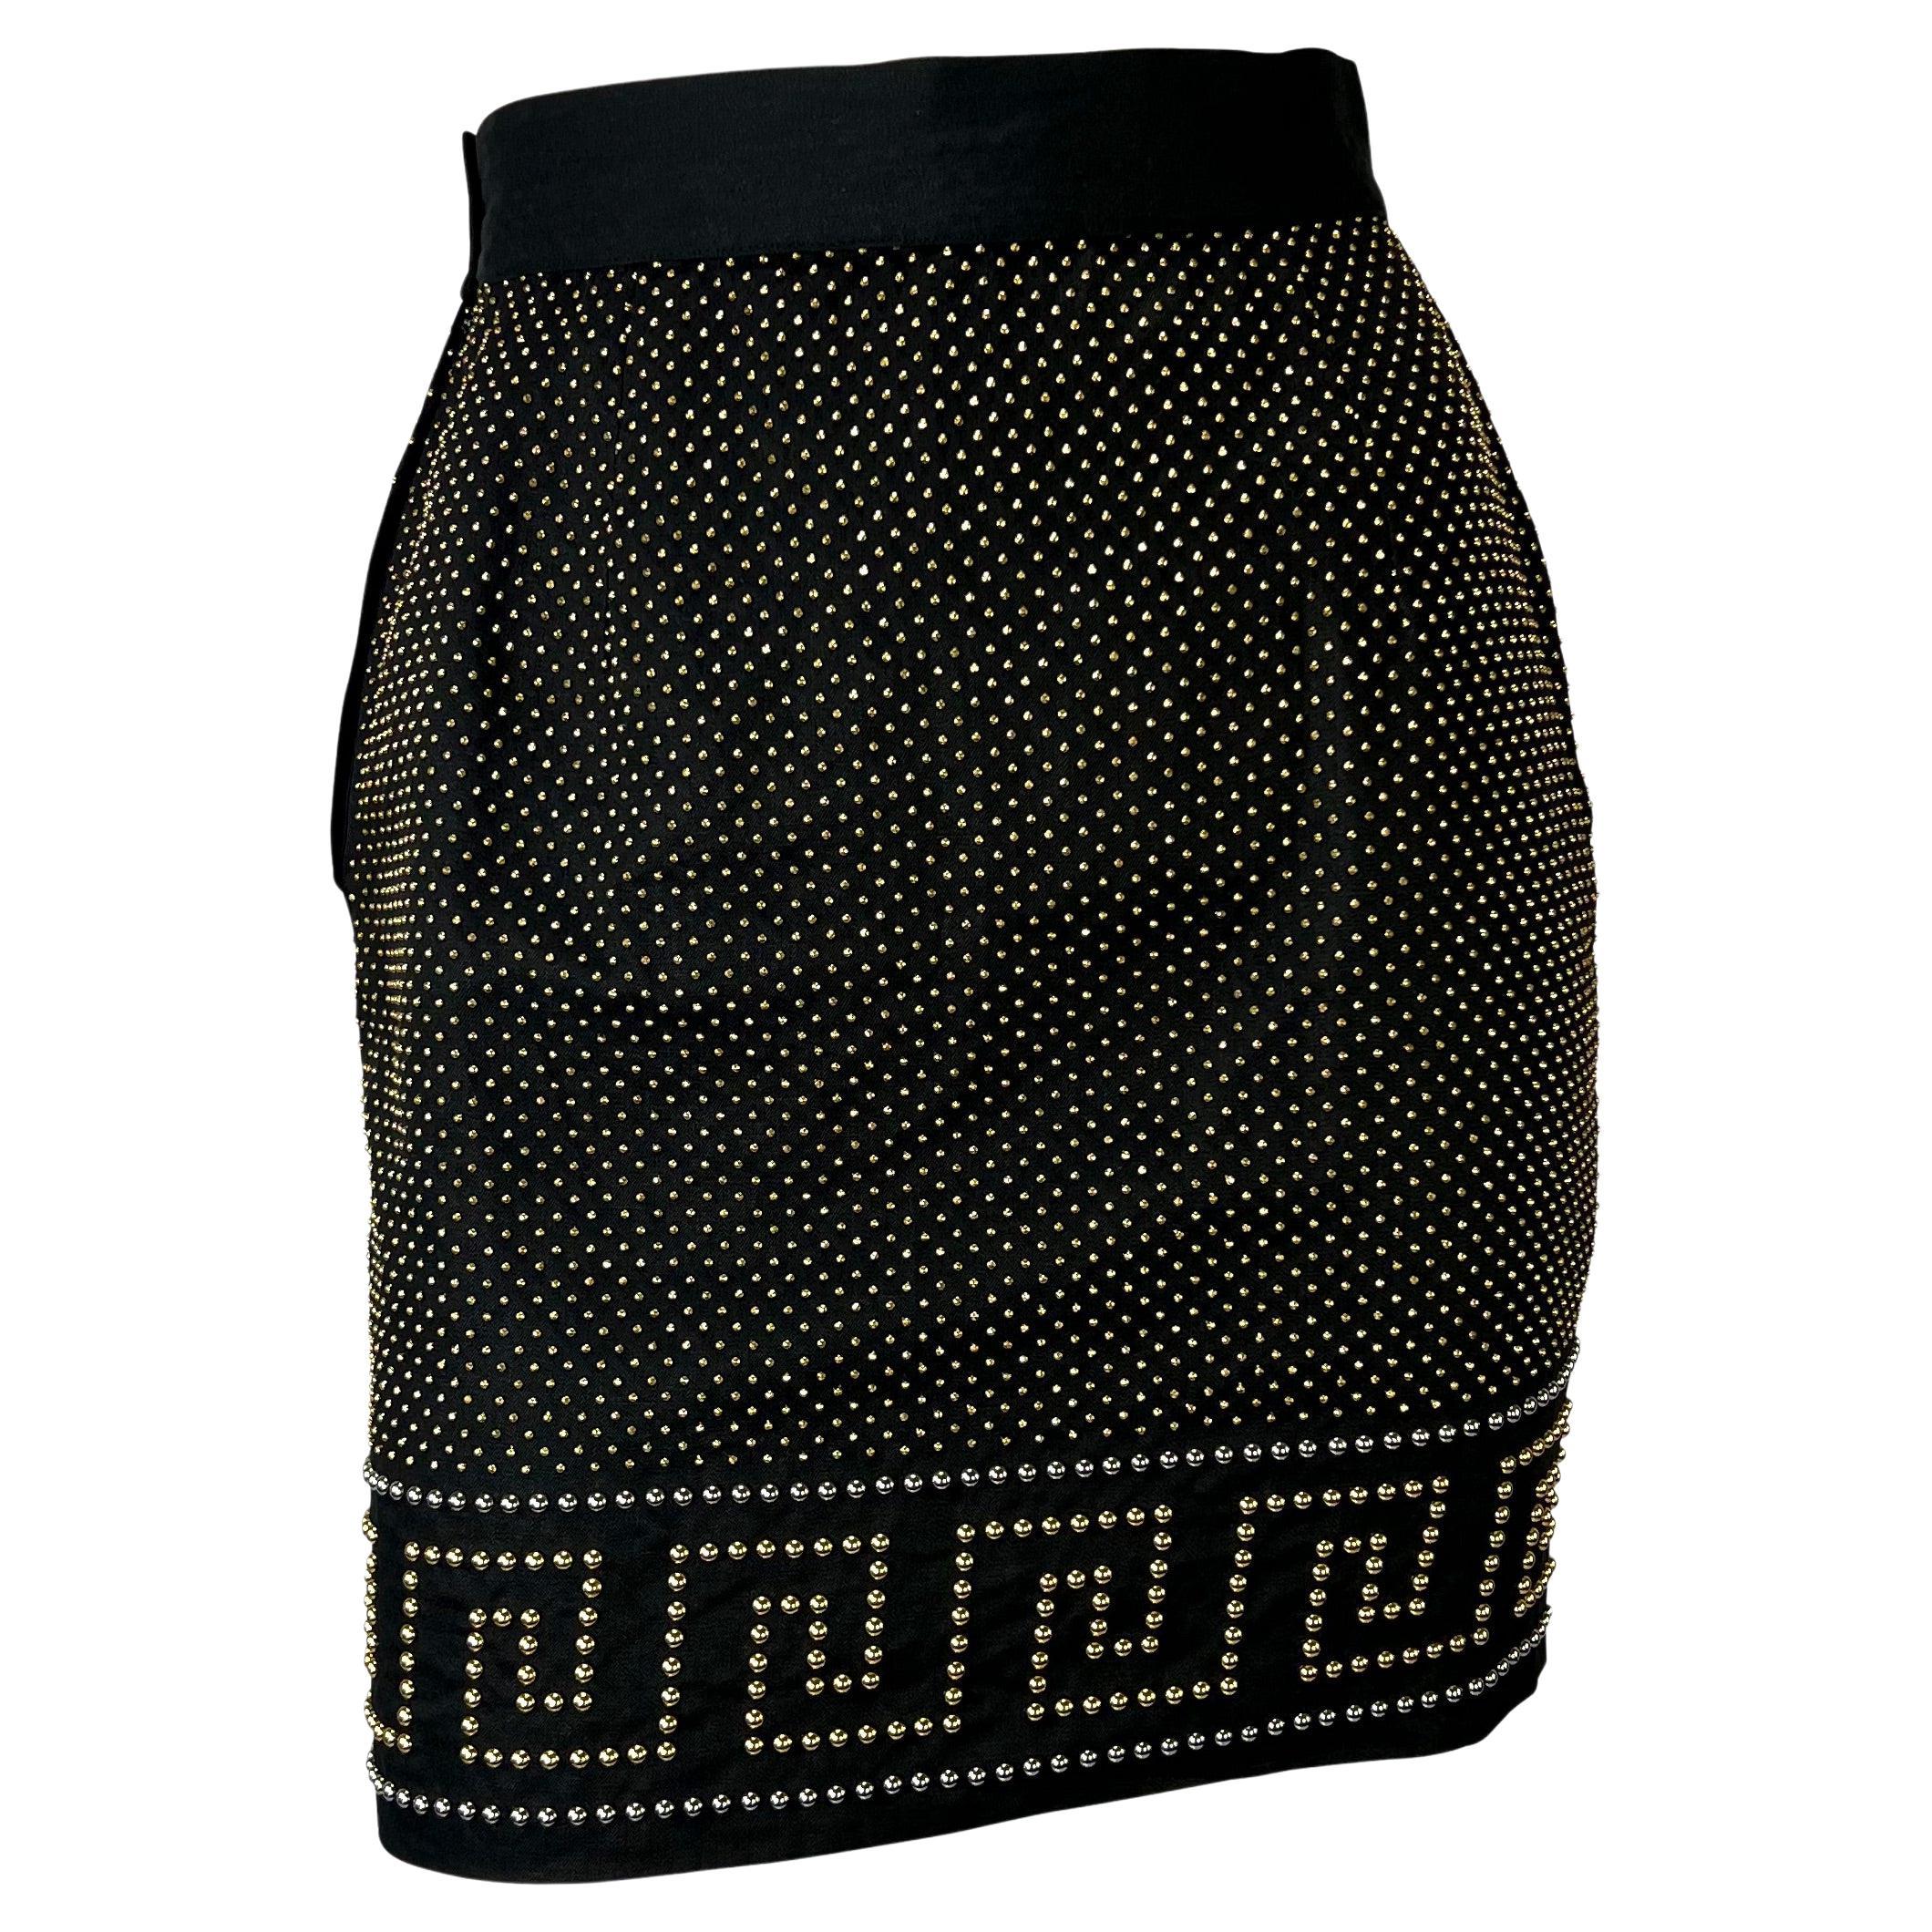 F/W 1992 Gianni Versace Couture 'Miss S&M' Studded Greek Key Skirt For Sale